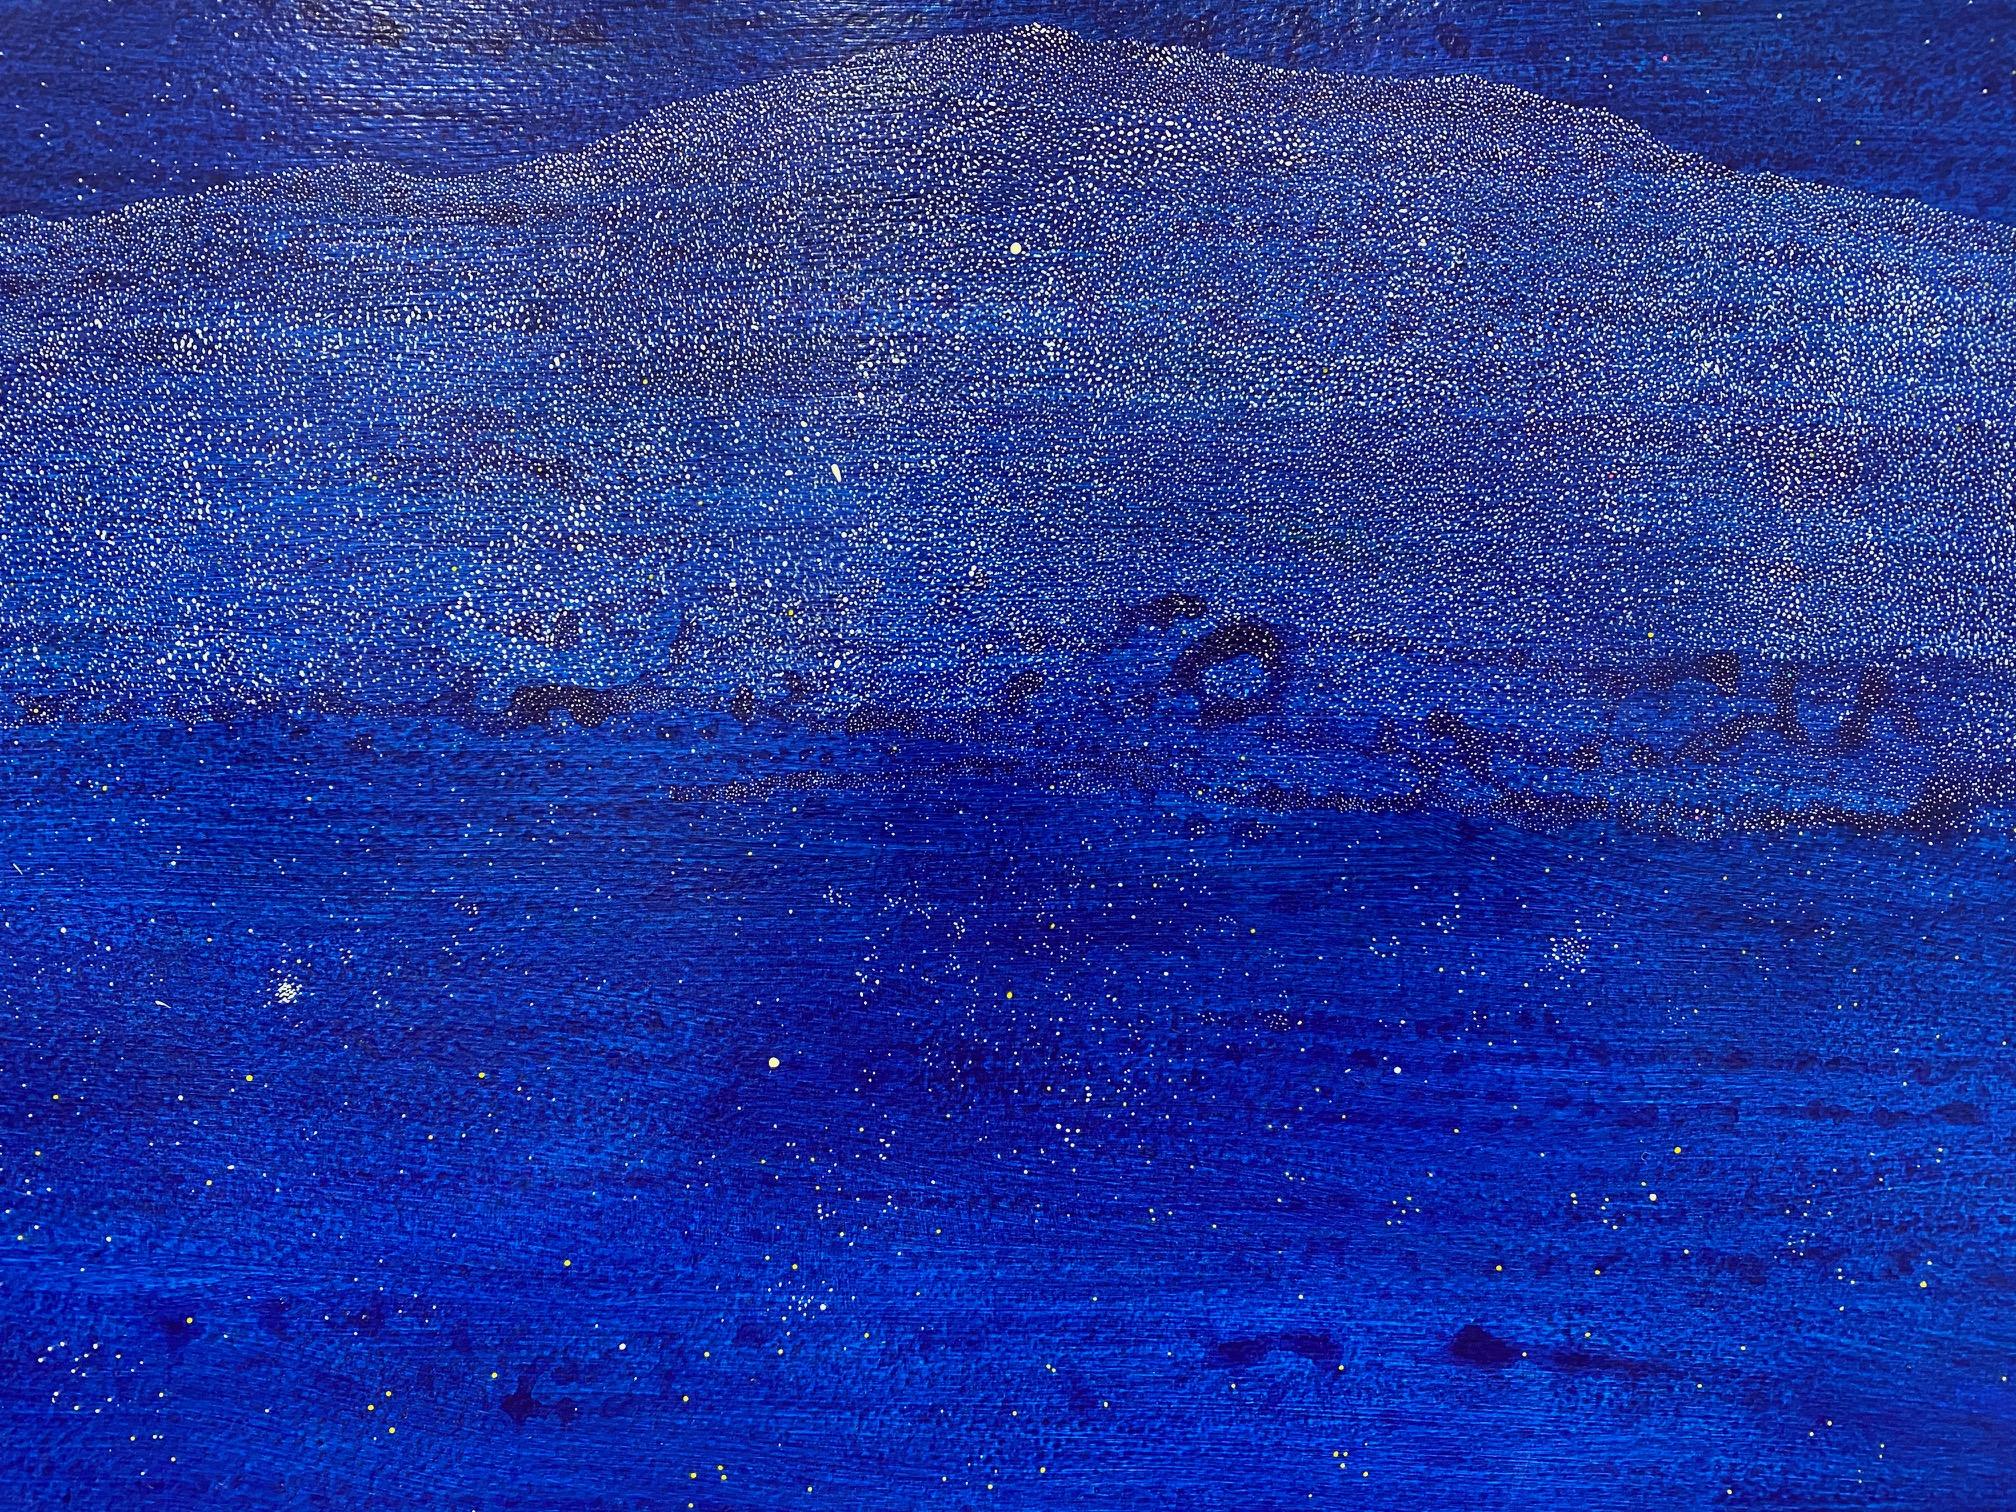 Ocean Nocturne - Contemporary Painting by James Isherwood